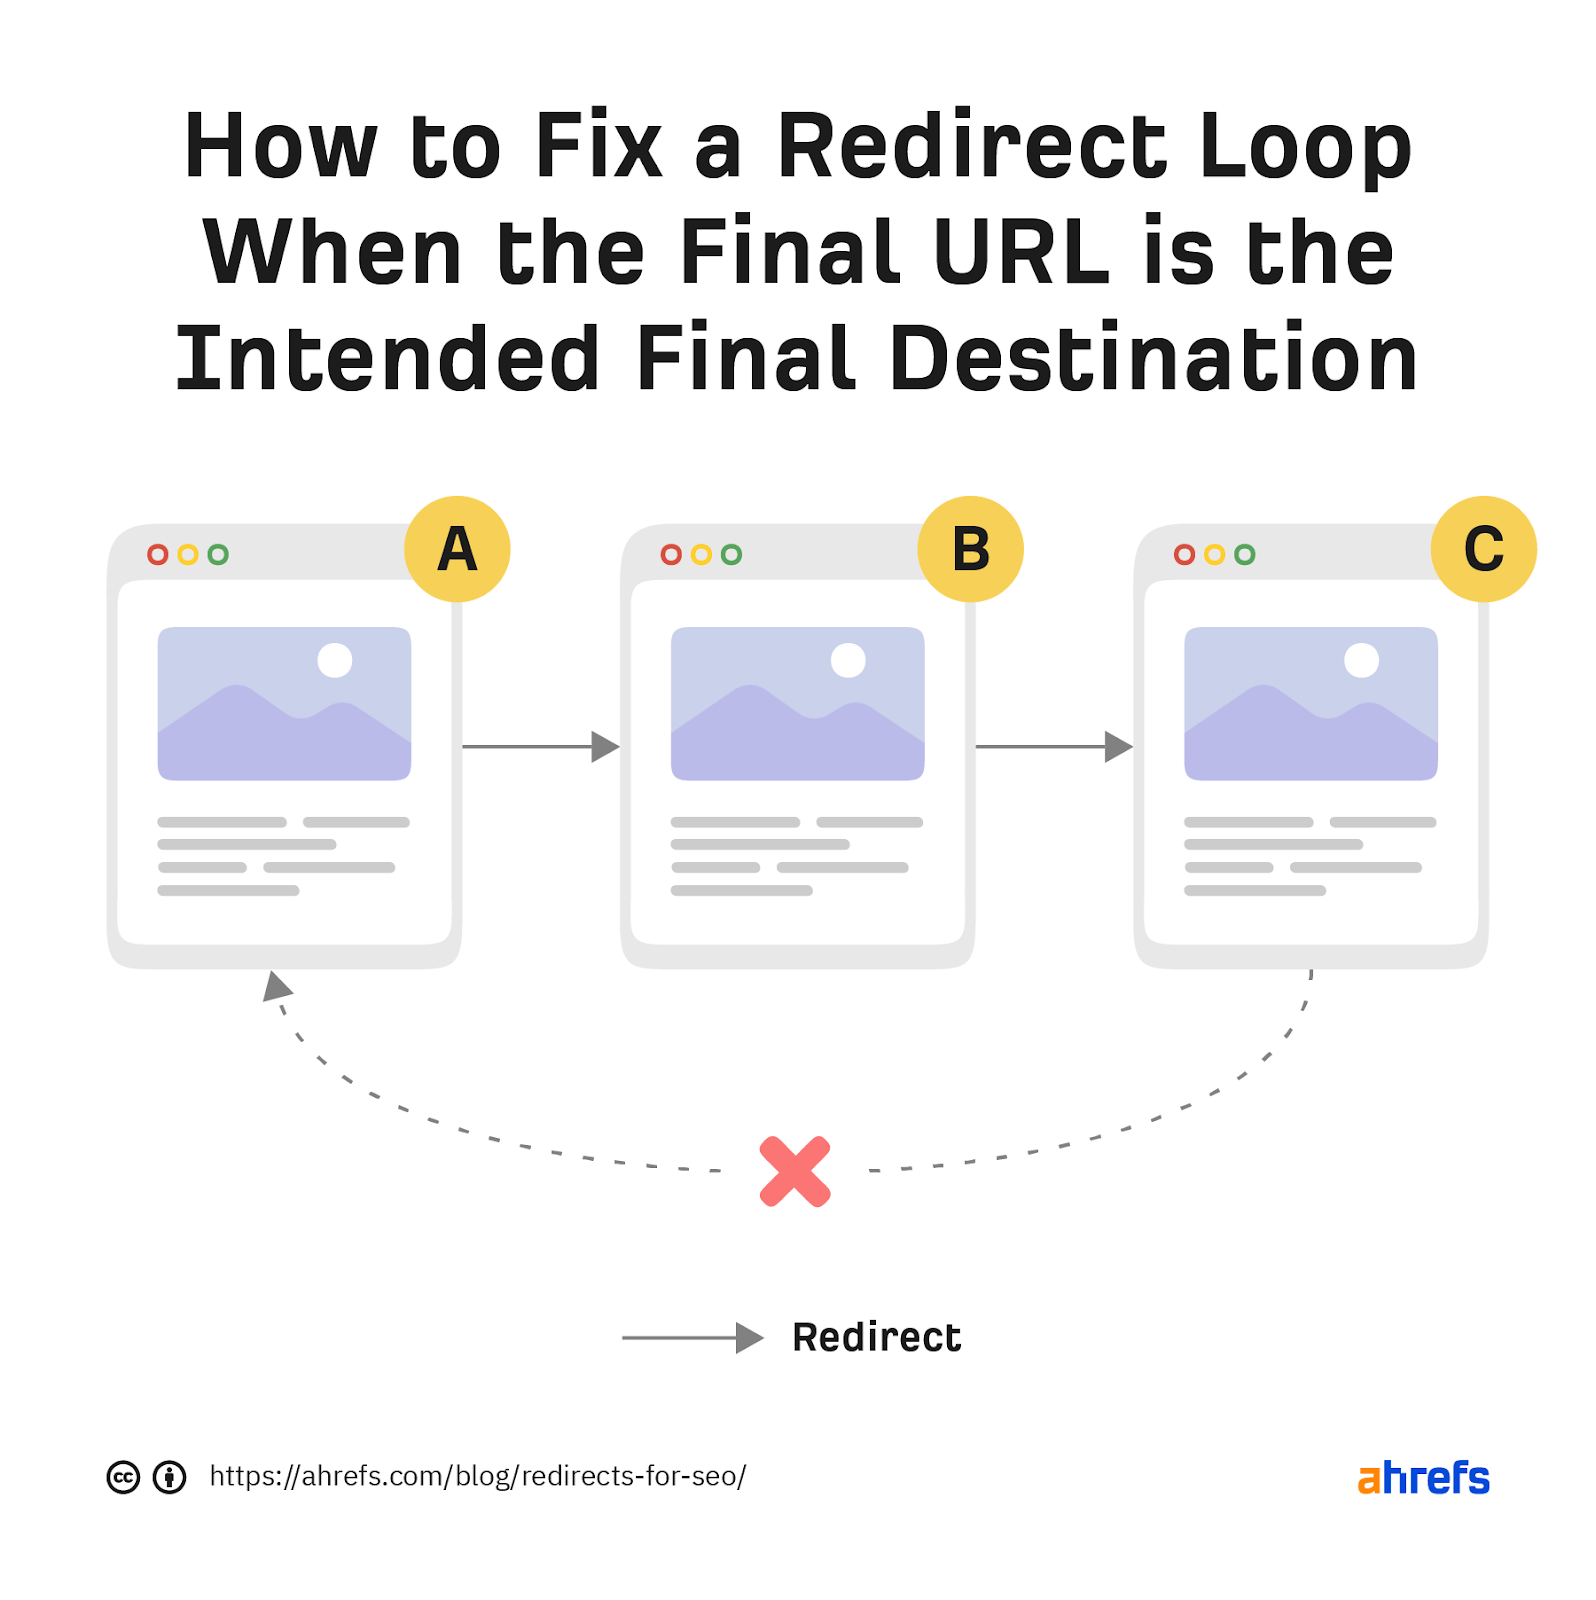 How to fix a redirect loop when the final URL is the intended final destination